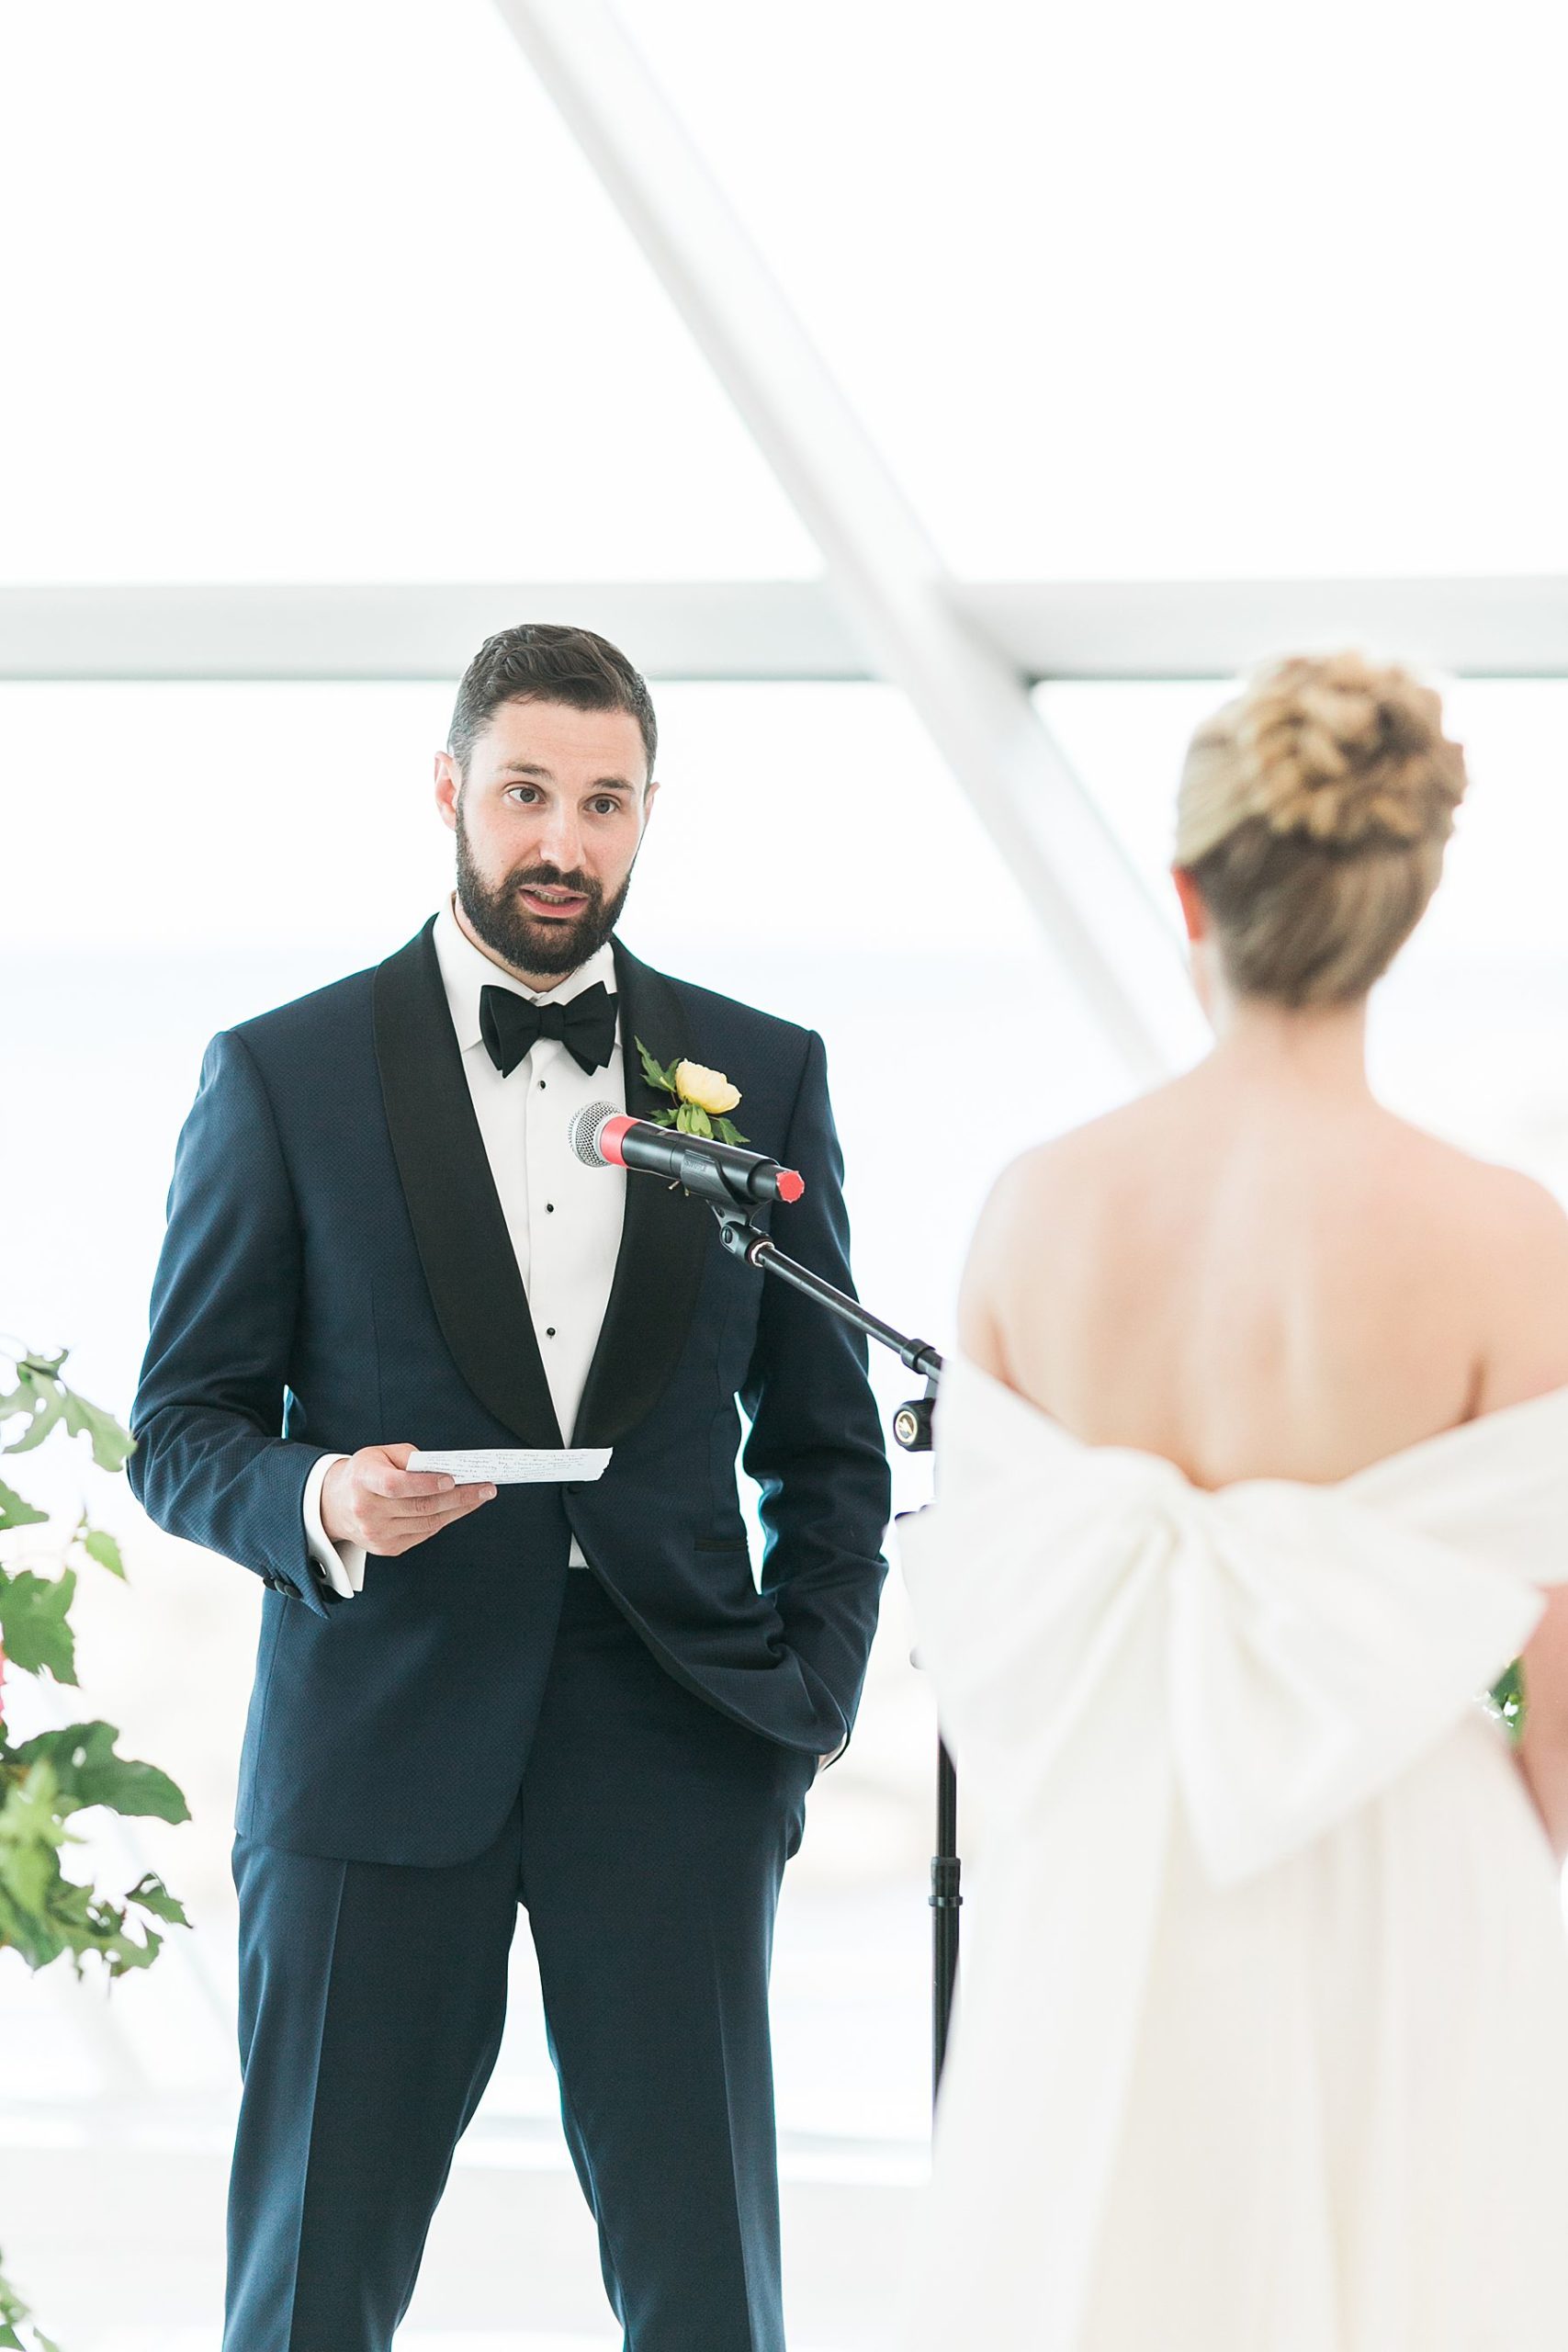 saying vows, modern minimal white and bright wedding ceremony at milwaukee art museum an architectural gem downtown with lake michigan view